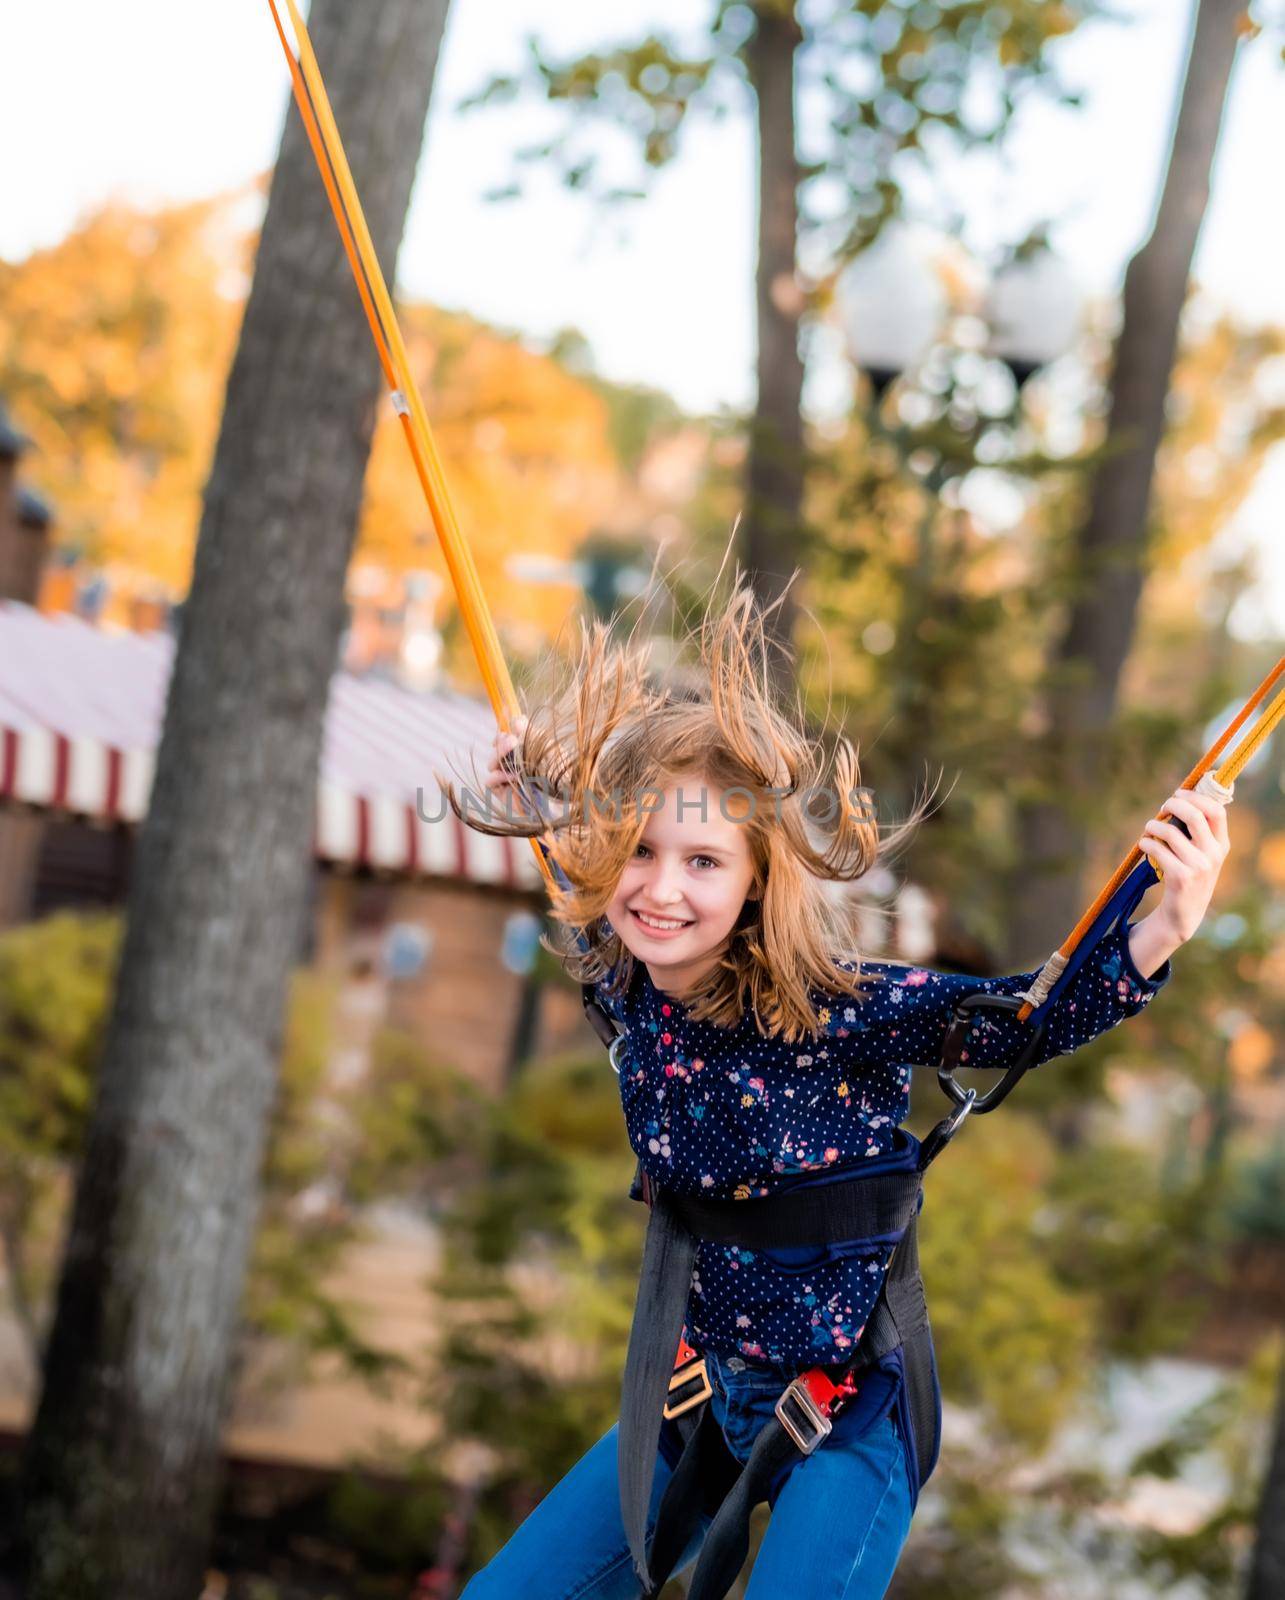 Smiling little girl jumping on trampoline jumping rope in autumn adventure park